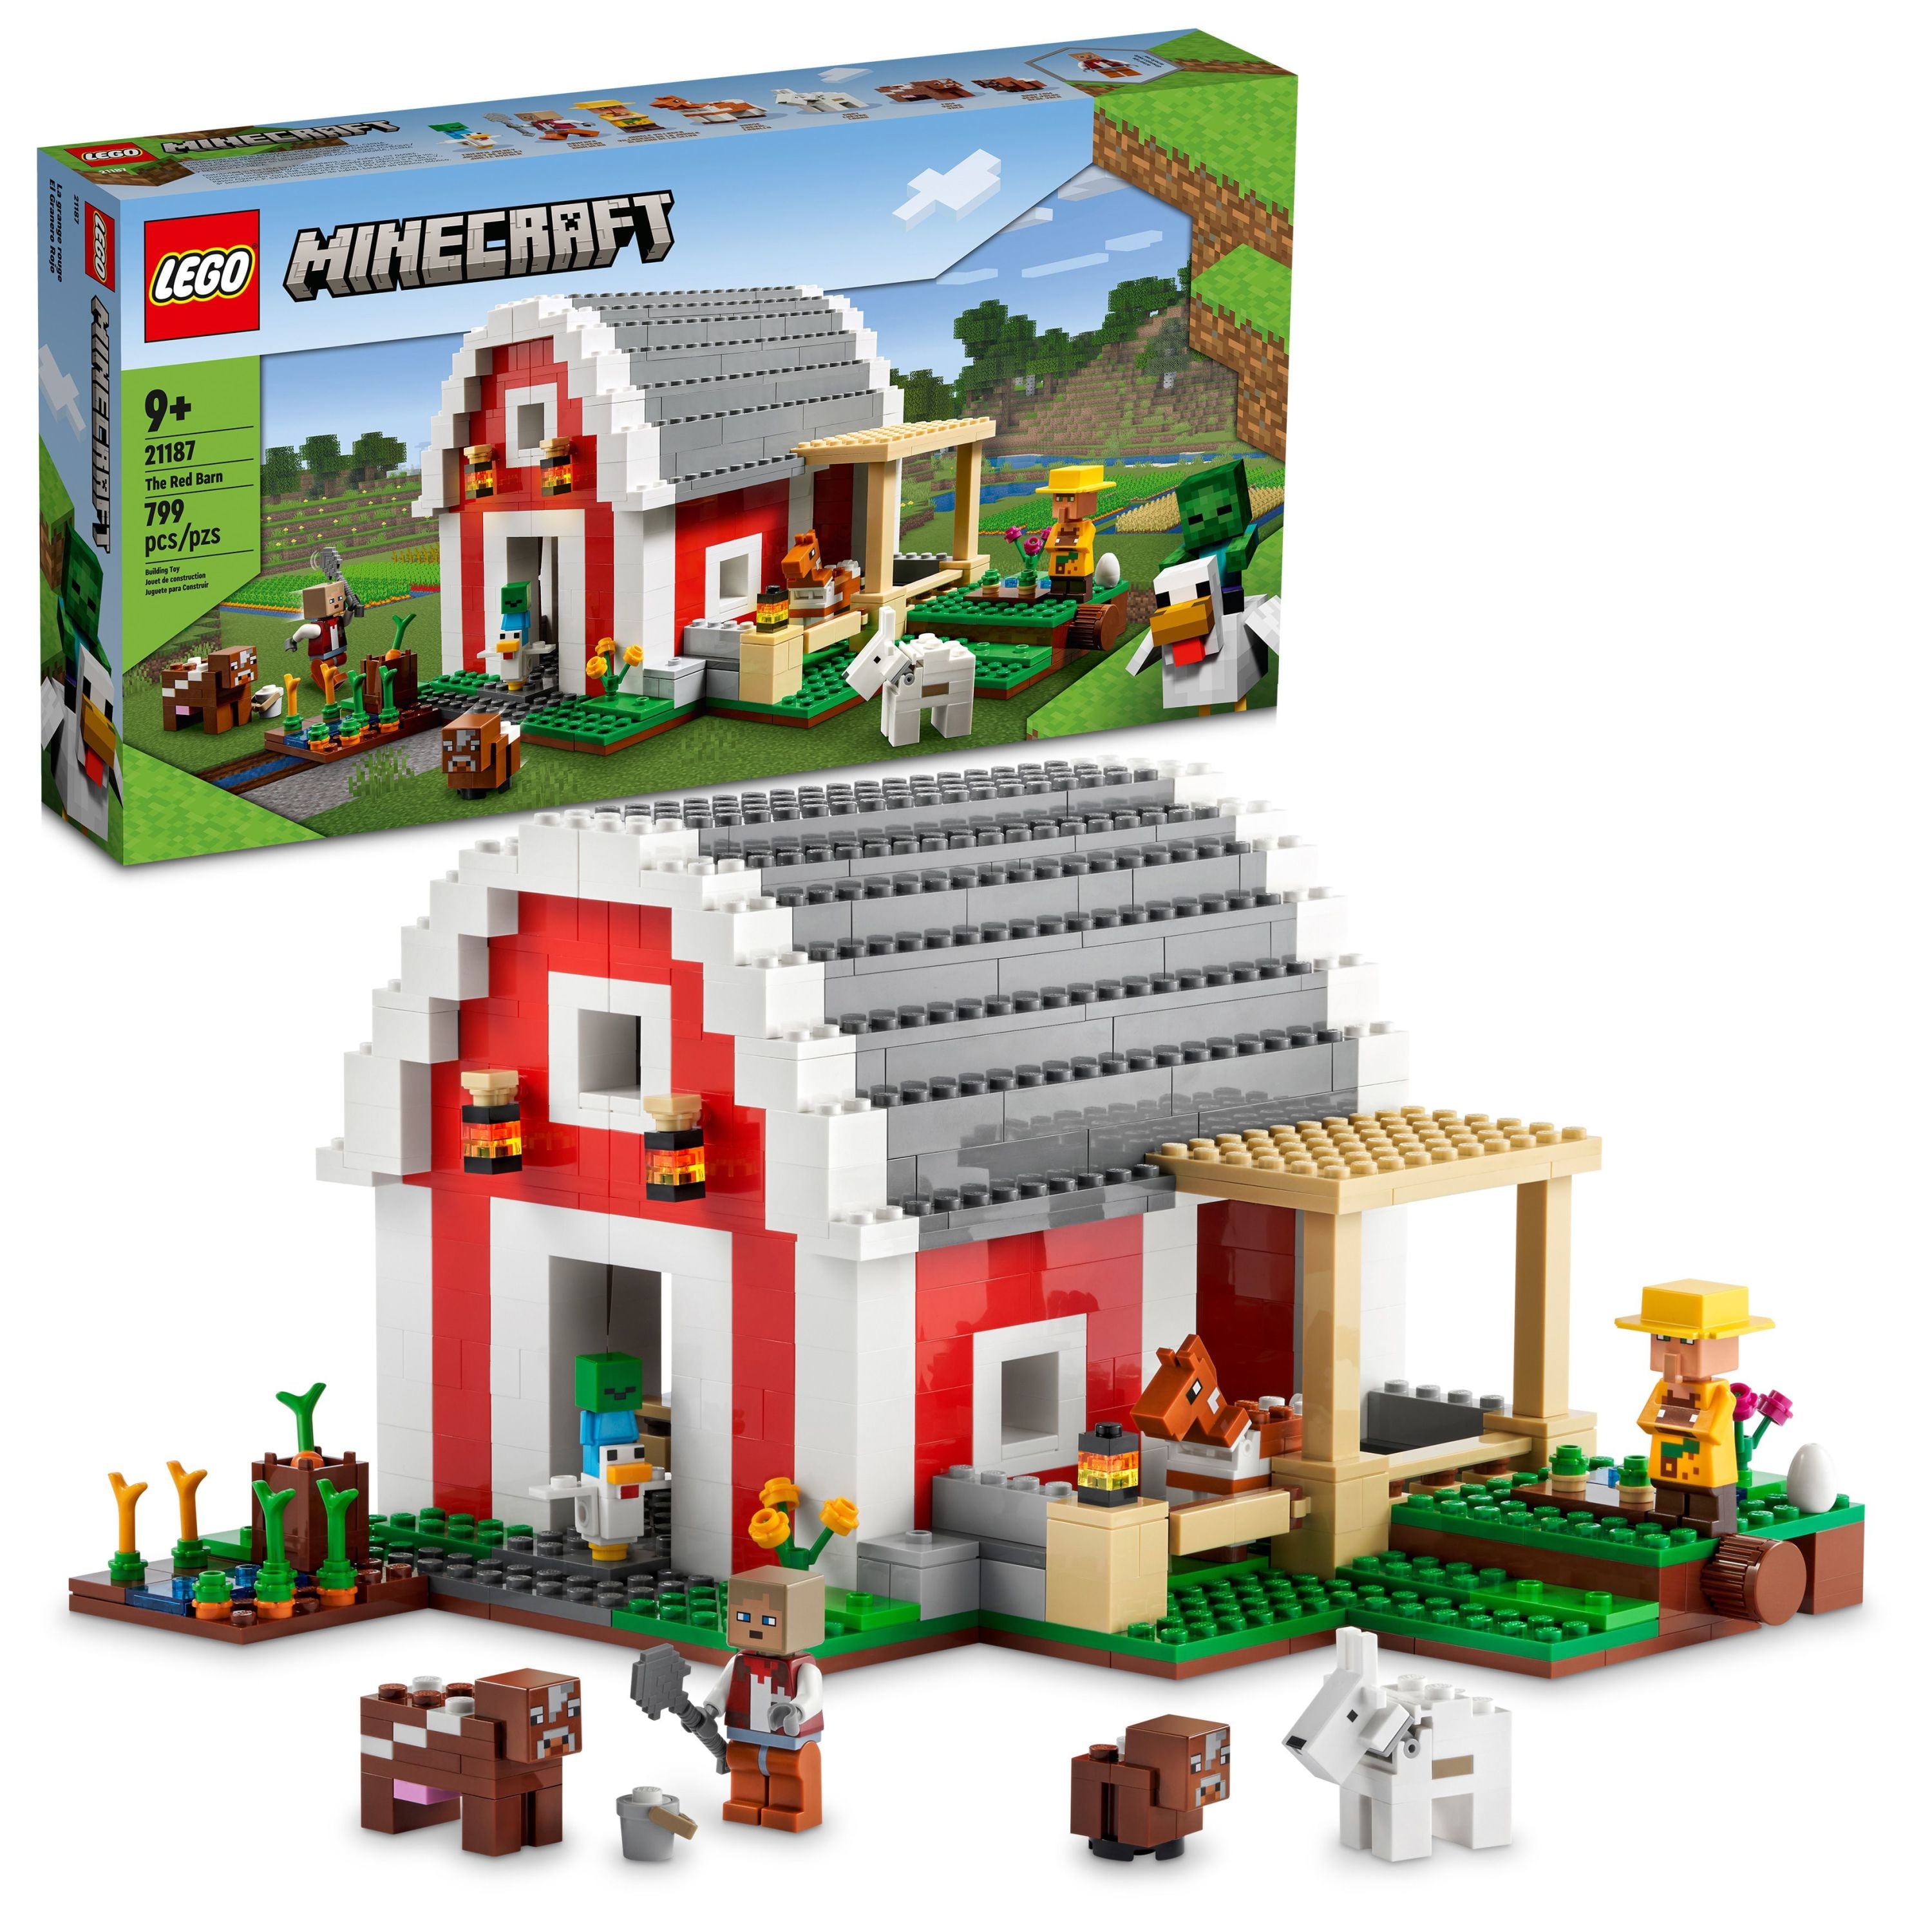 LEGO Minecraft The Red Barn Farm House Toy 21187 with Villager and Figure Plus Goat, Cow & Figures for Kids - Walmart.com